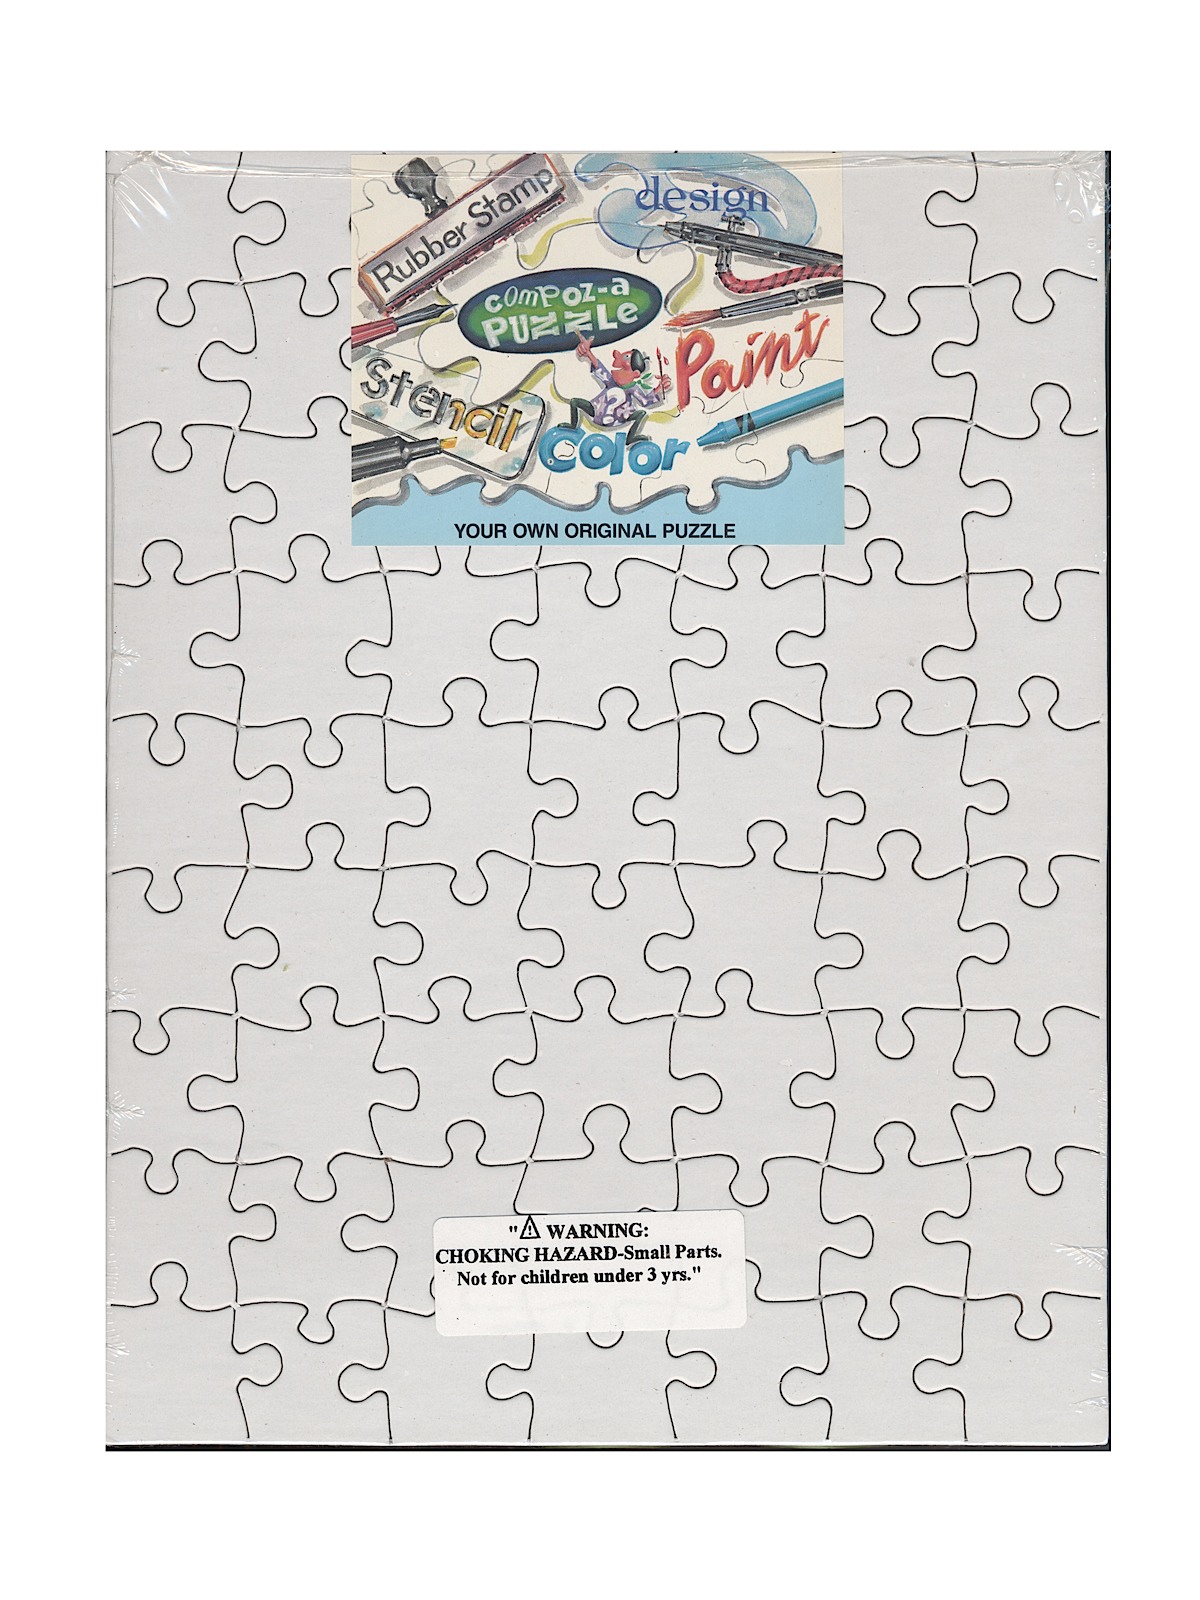 Blank Puzzles 8 1 2 In. X 11 In. 63 Pieces Each Pack Of 4